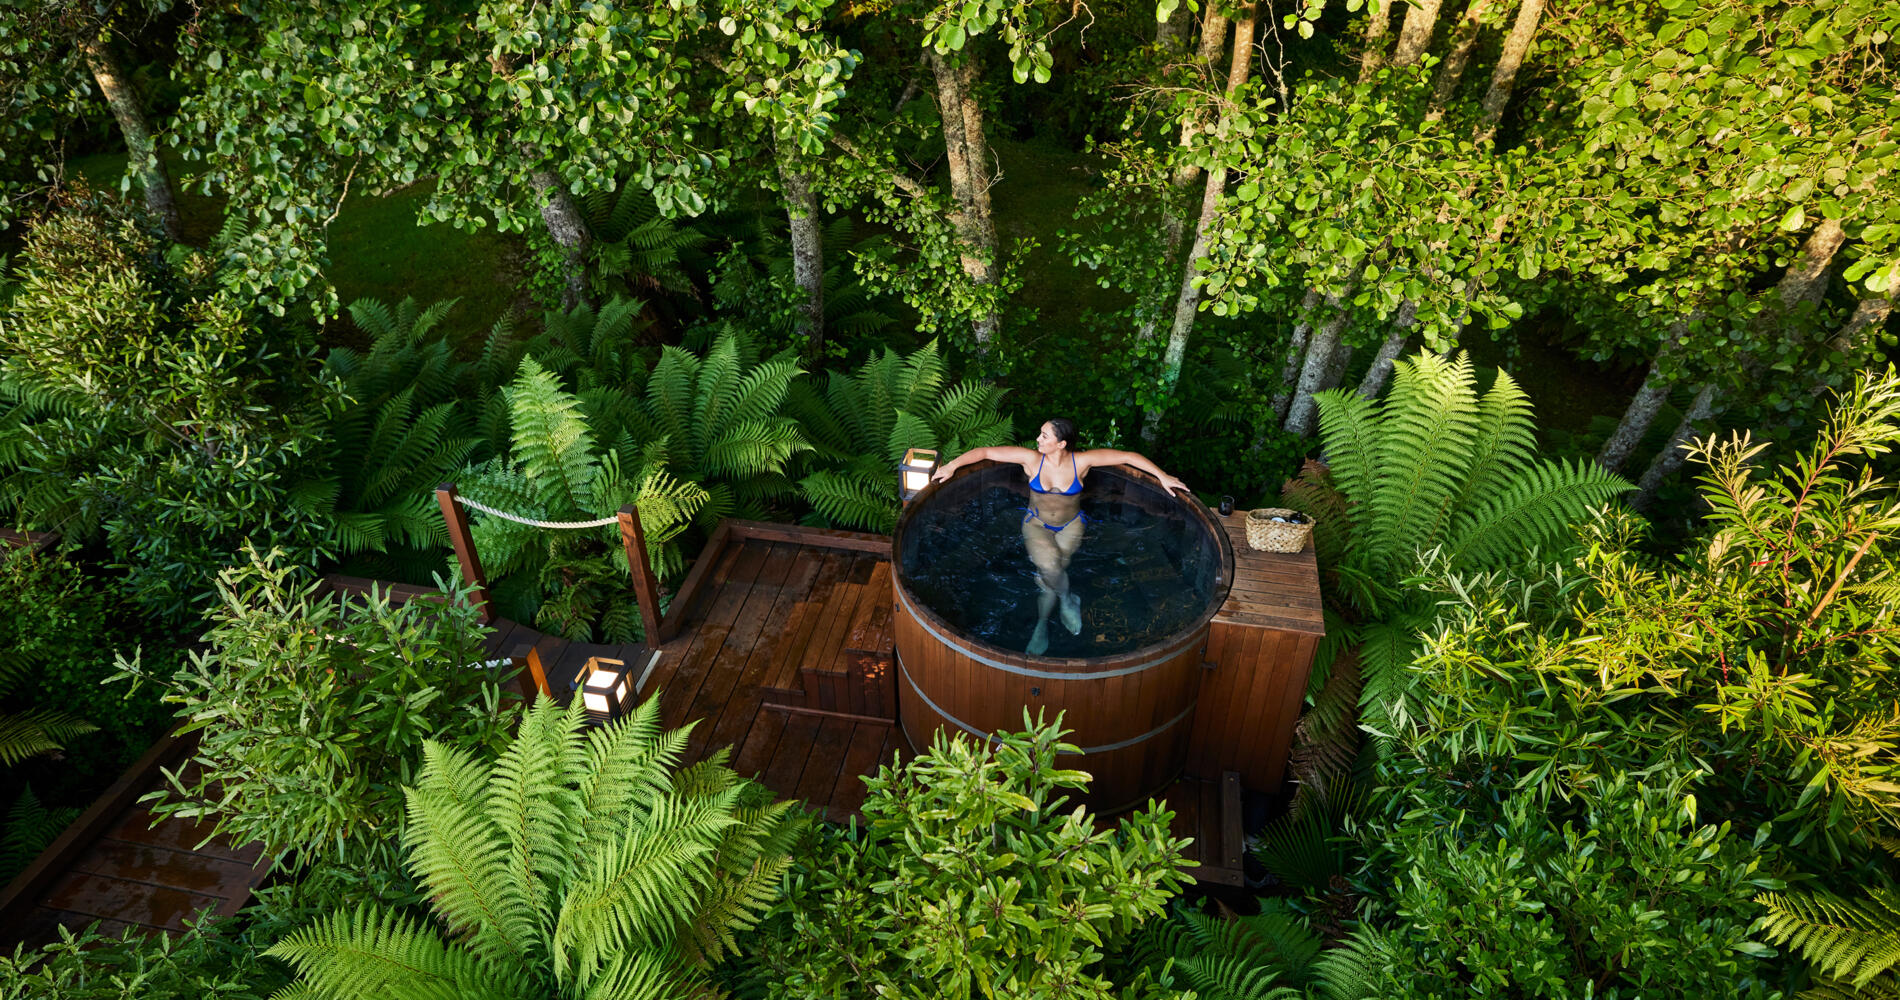 Top 10 wellness experiences in New Zealand | 100% Pure NZ